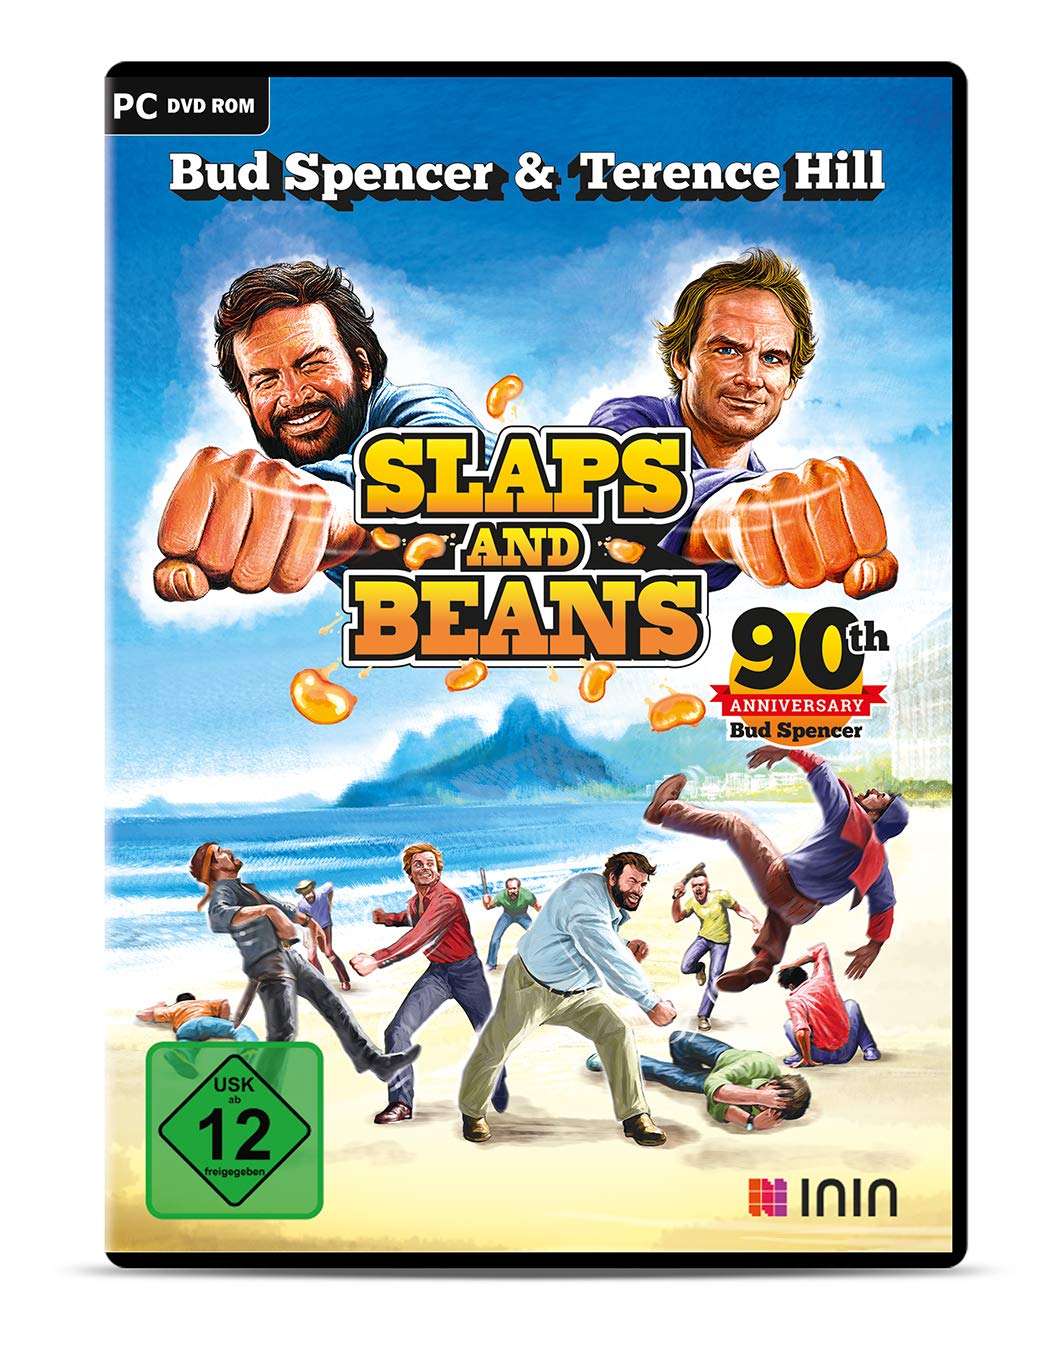 Bud Spencer & Terence Hill – Slaps And Beans player count stats